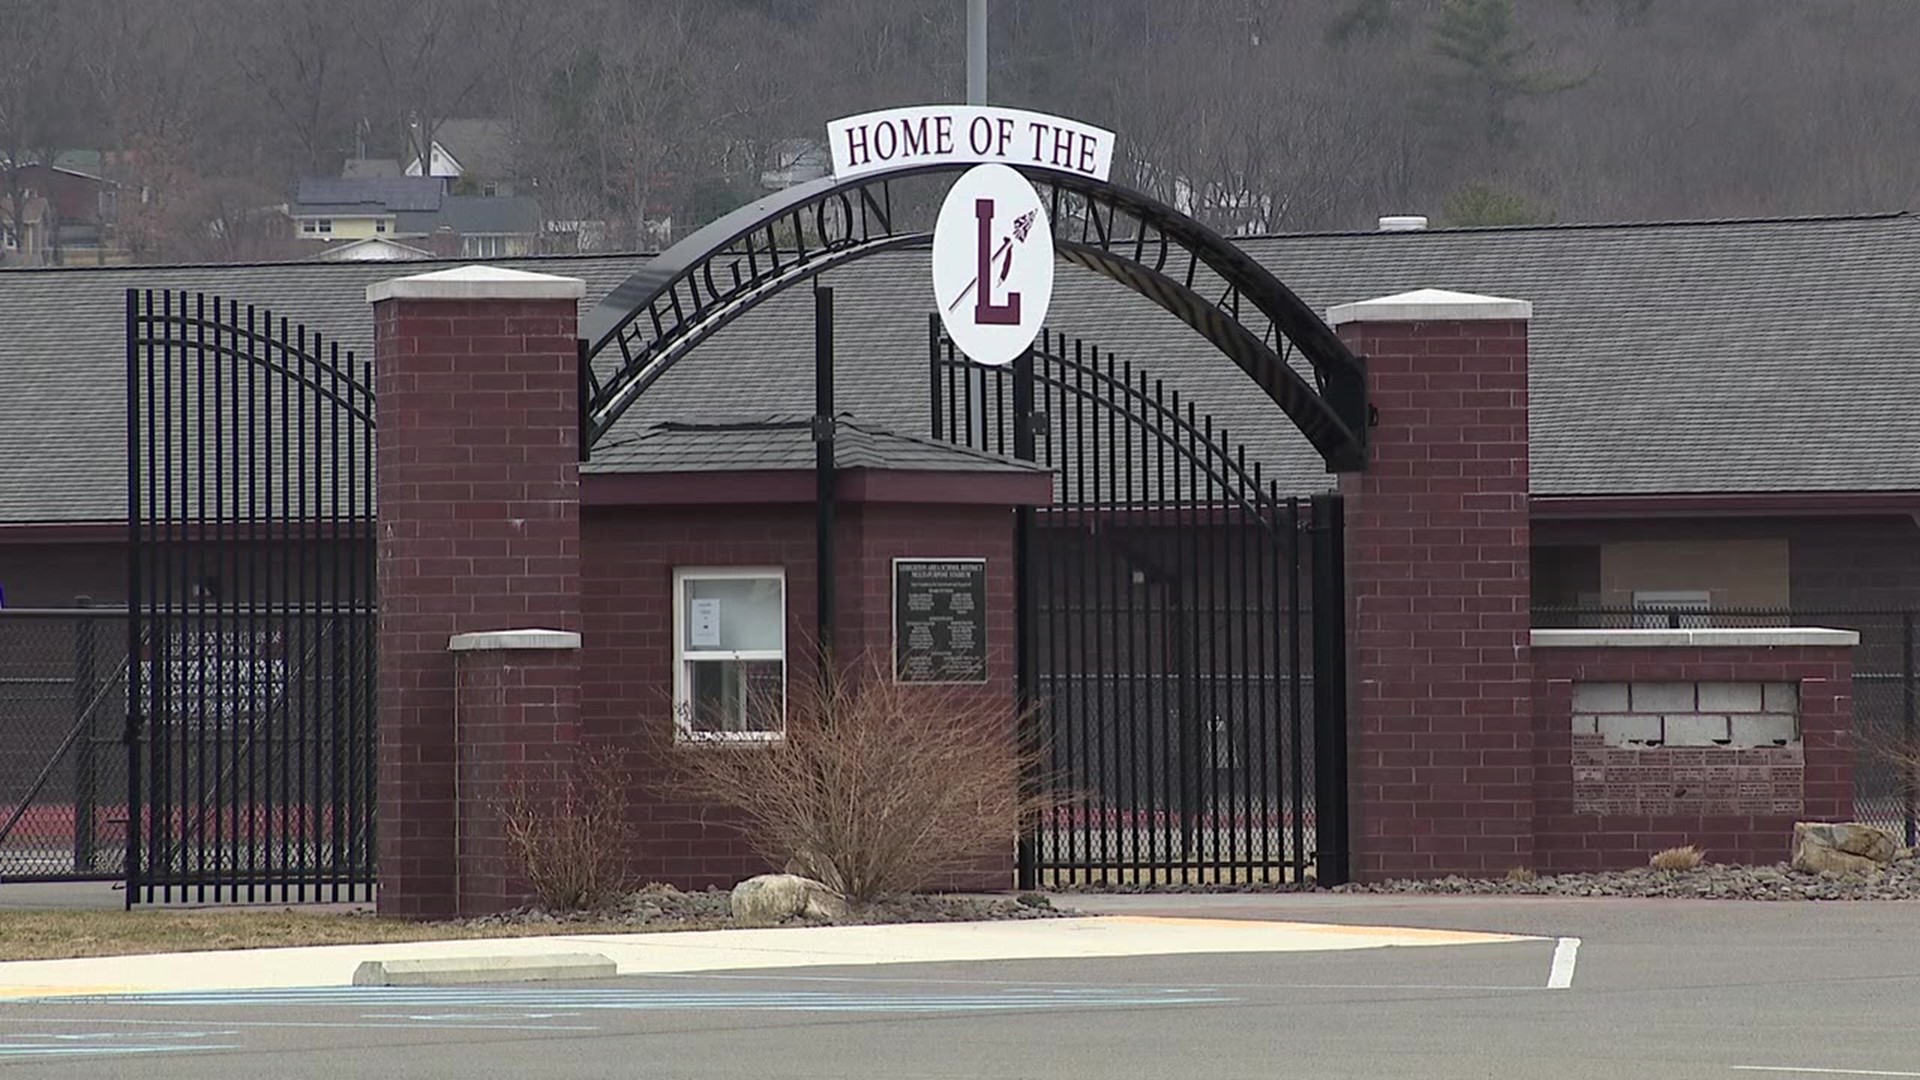 Lehighton Area School District has postponed after school activities for the next few days, as a deep cleaning of district buildings takes place.